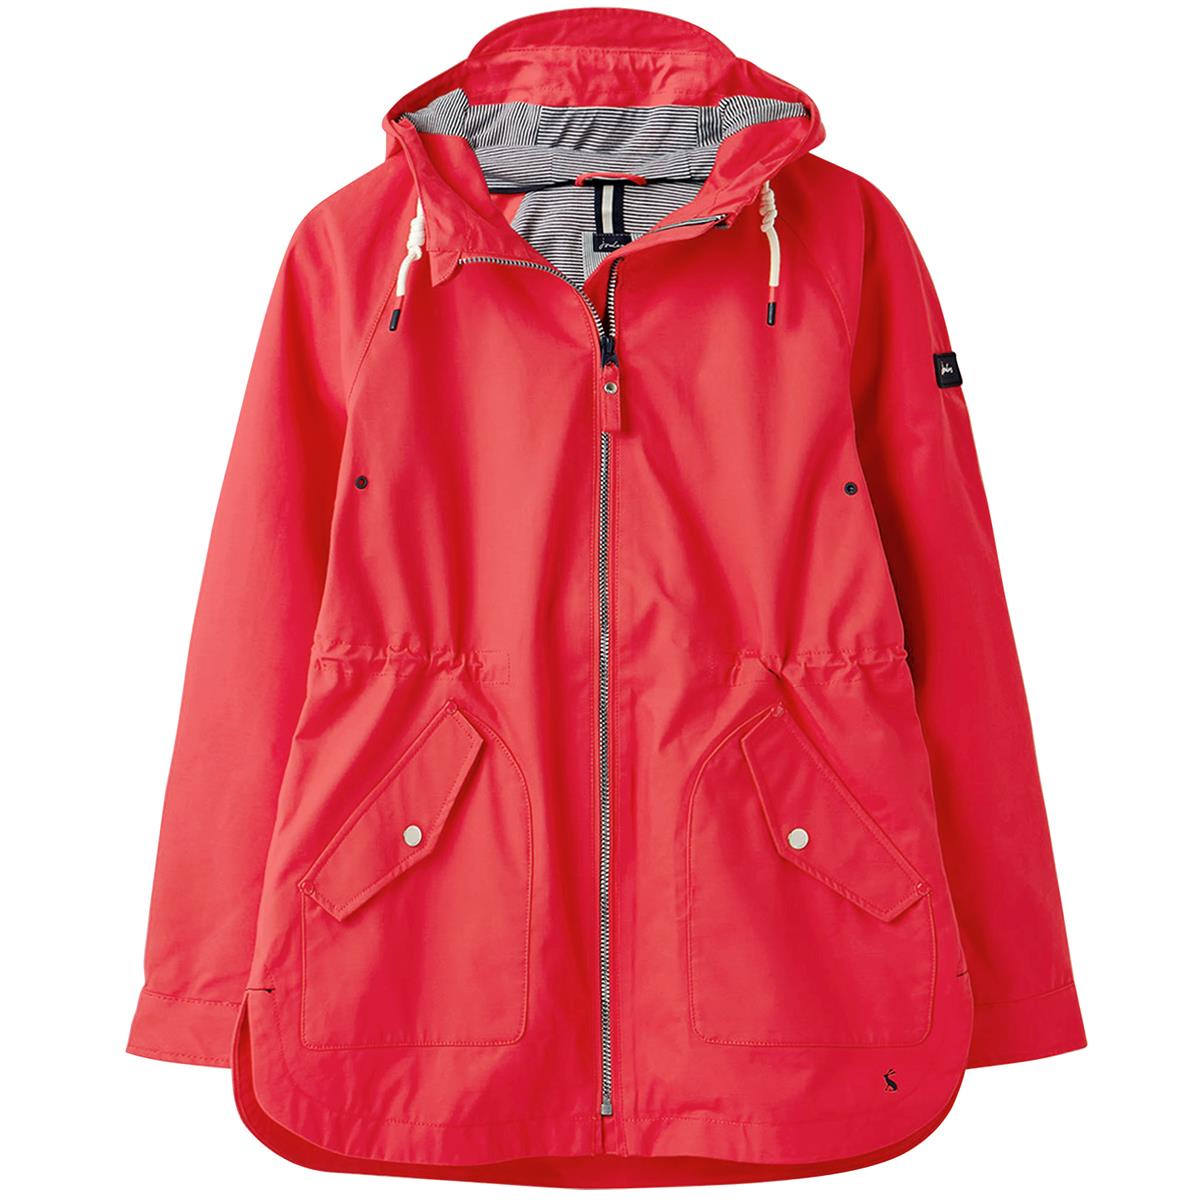 Can the joules shoreside coastal waterproof jacket be machine washed?